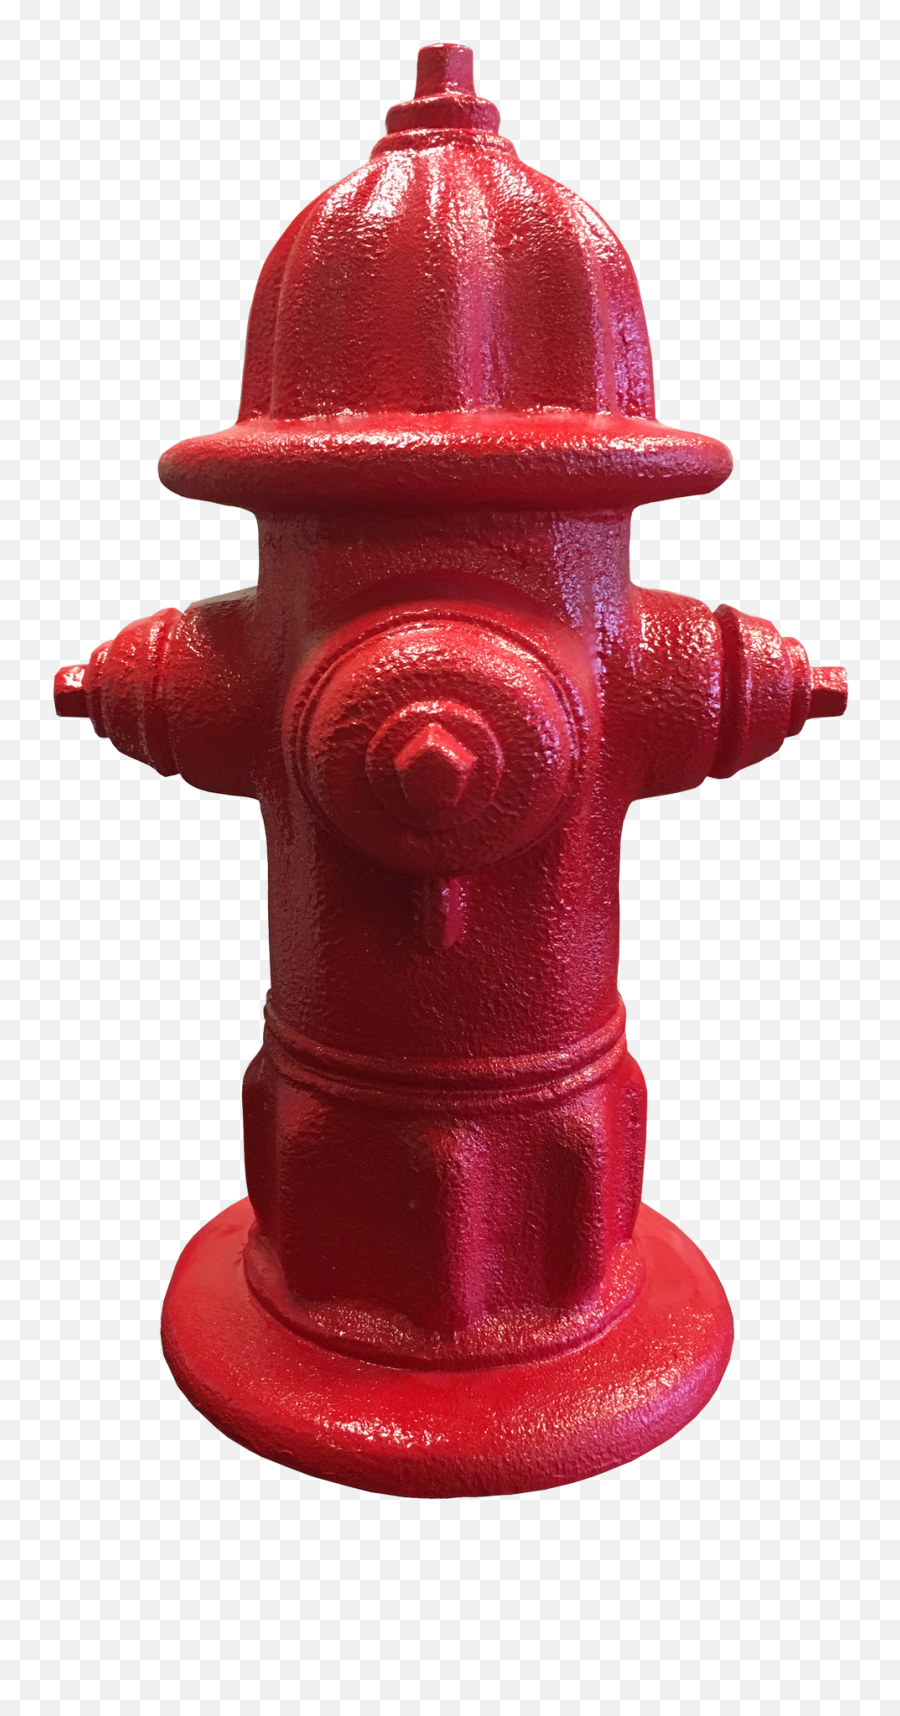 Download Fire Hydrant Png Image For Free Emoji,Fire On Transparent Background